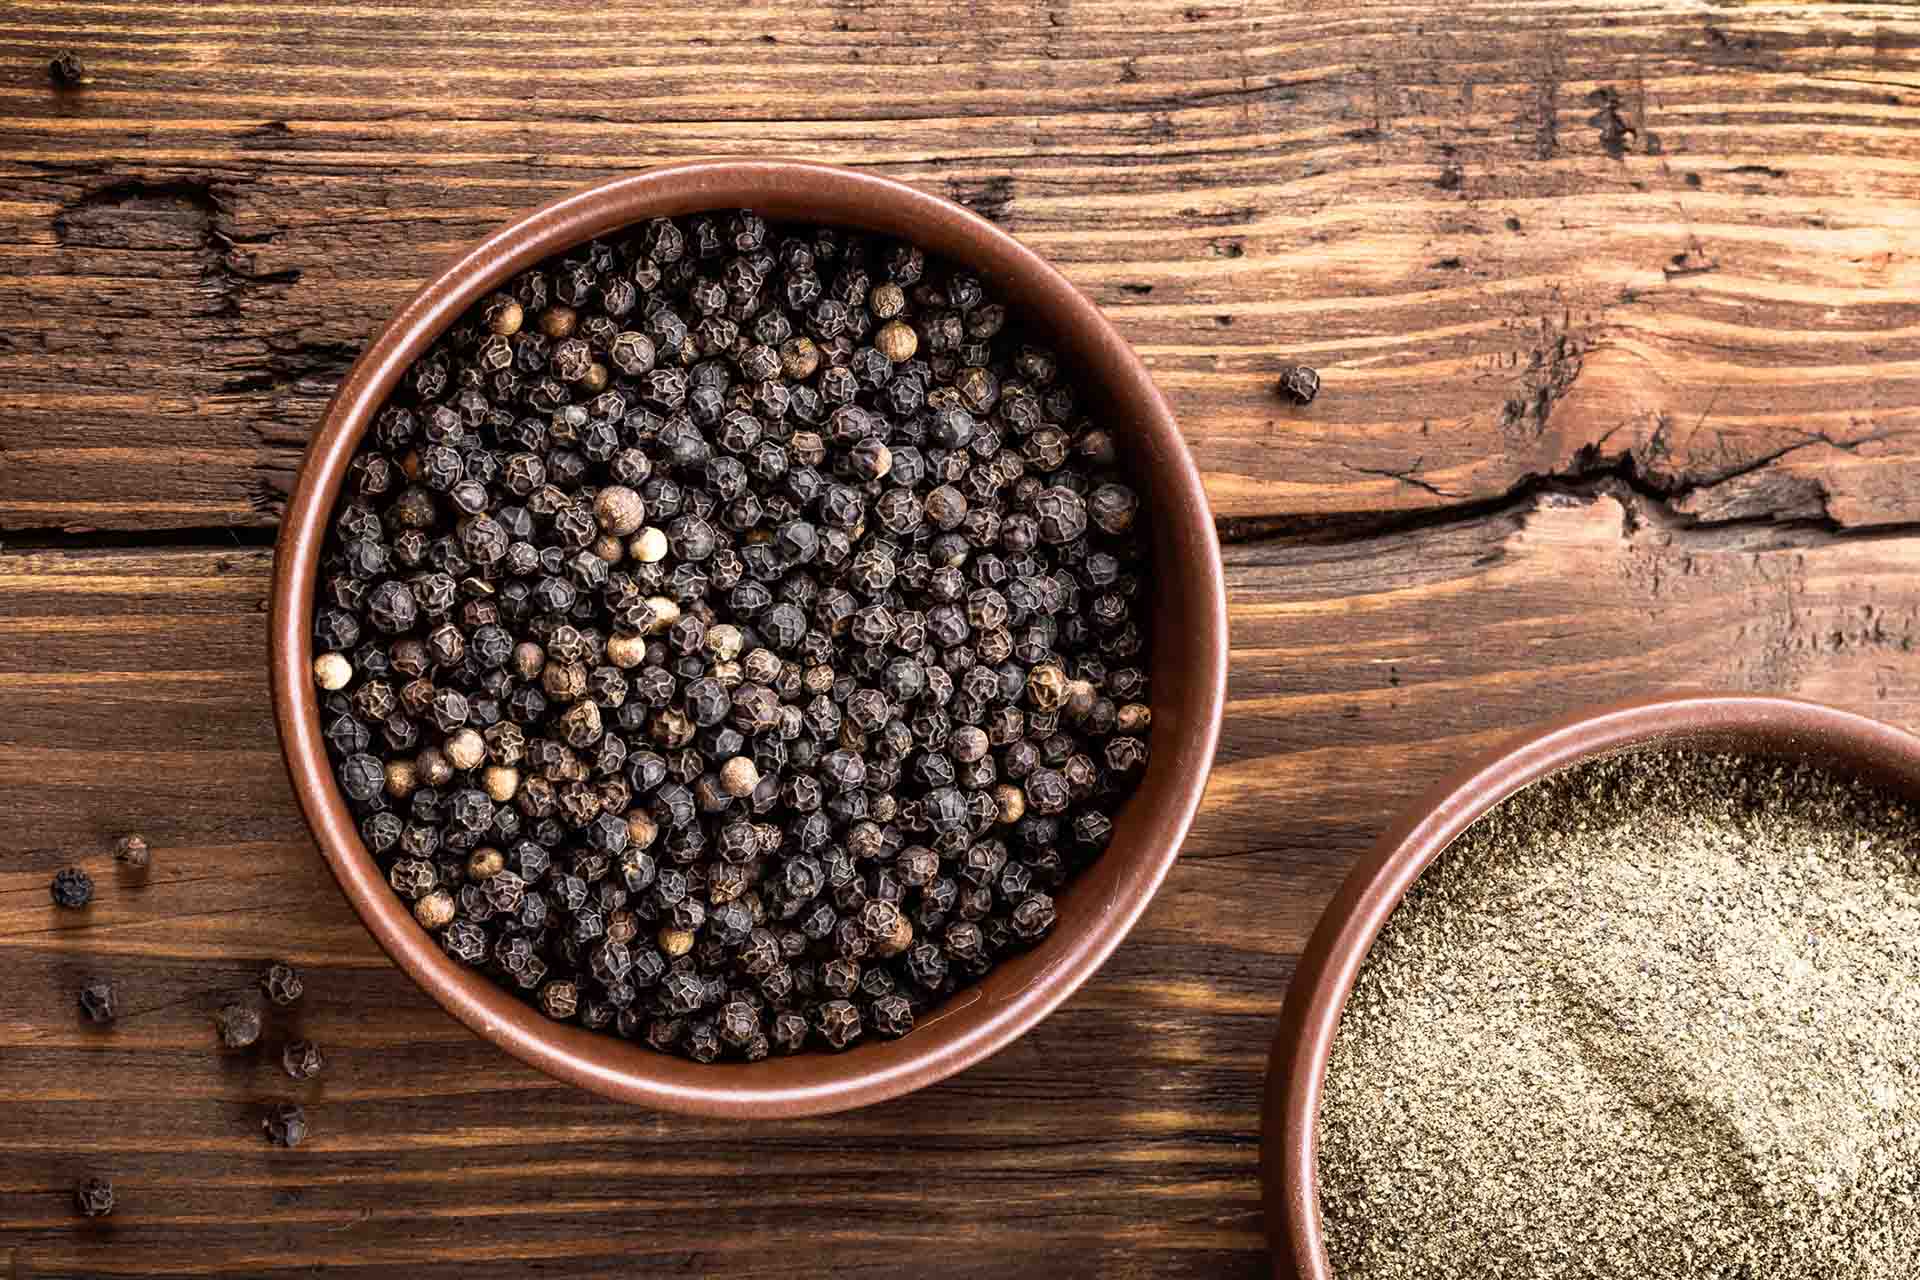 Bowl of black peppercorns sitting on a wooden table.